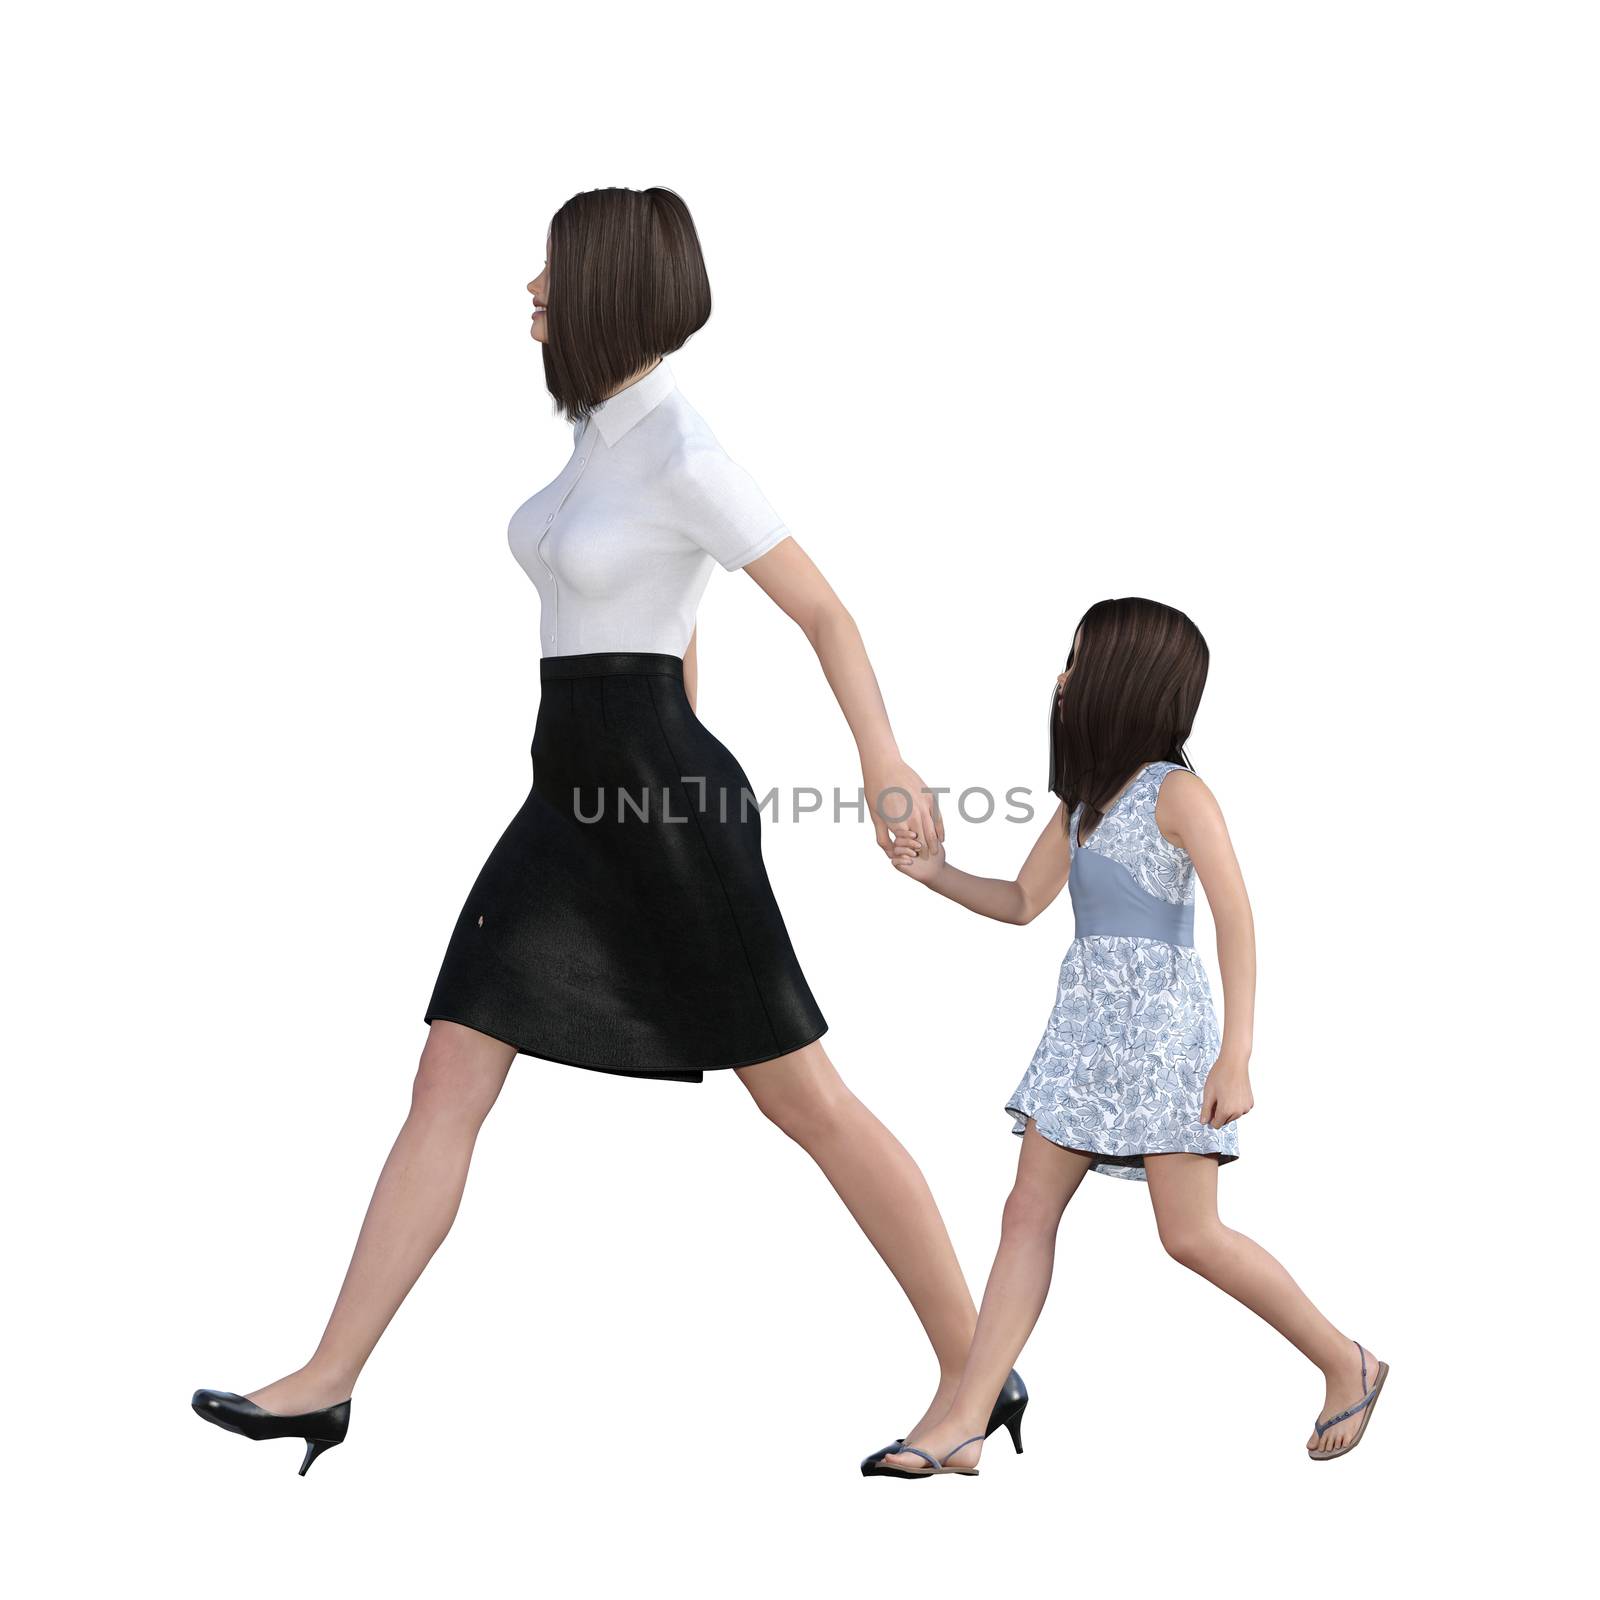 Mother Daughter Interaction of Girl Holding Mom Hand as an Illustration Concept